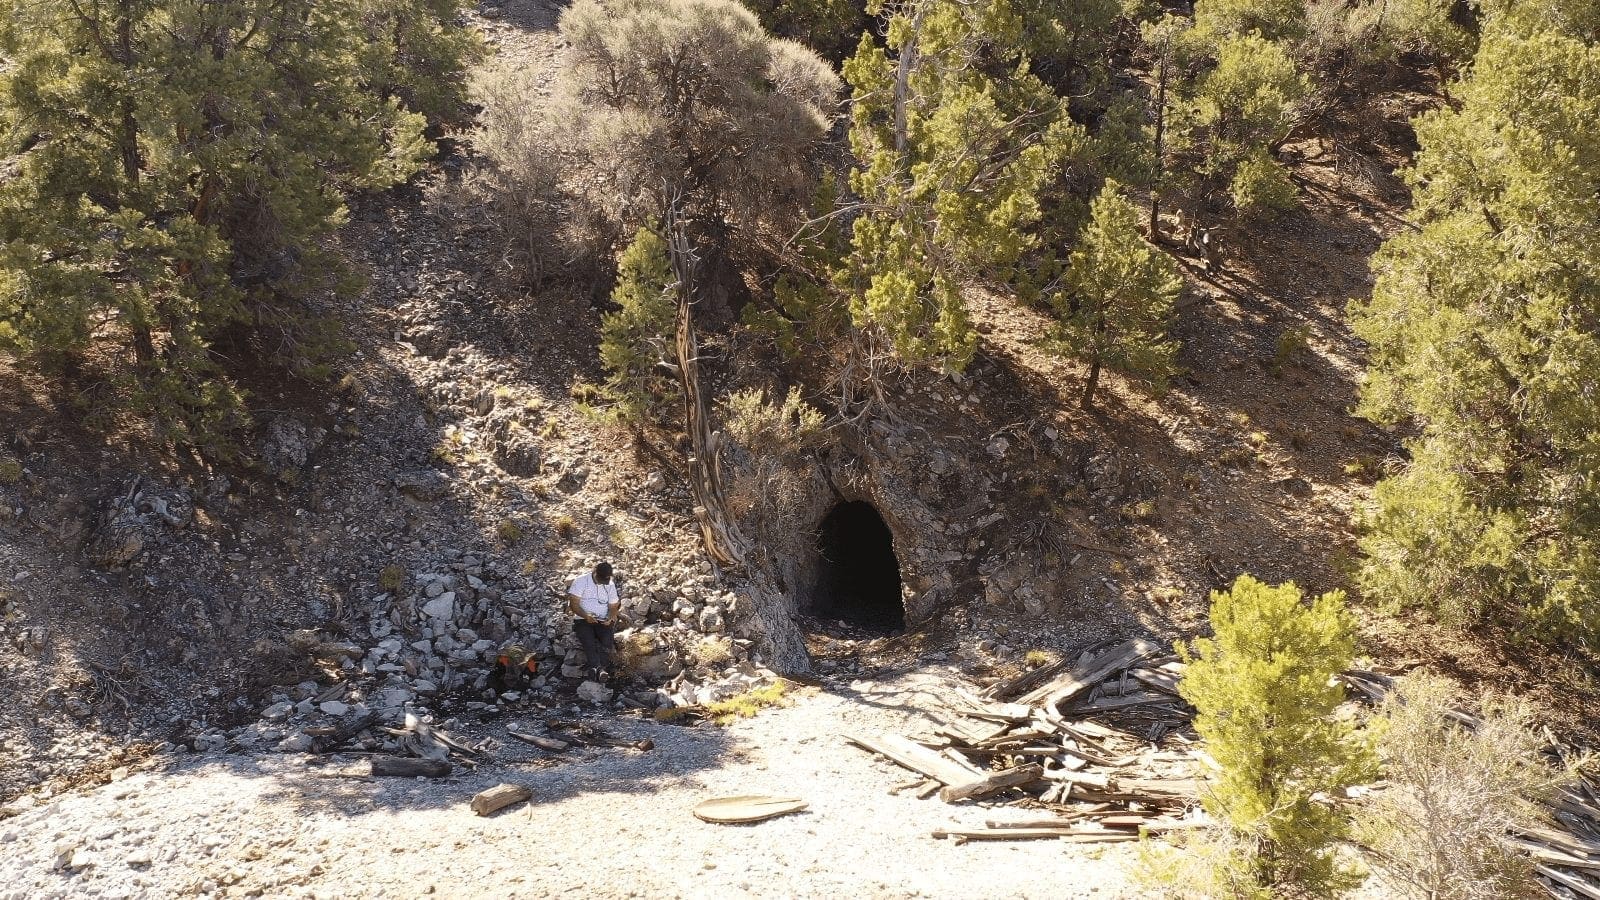 6.88 Acre CHAMPION MILLSITE, SUR 37B Patented Mining Claim in The Diamond Mining District Just North of Eureka, Nevada photo 1